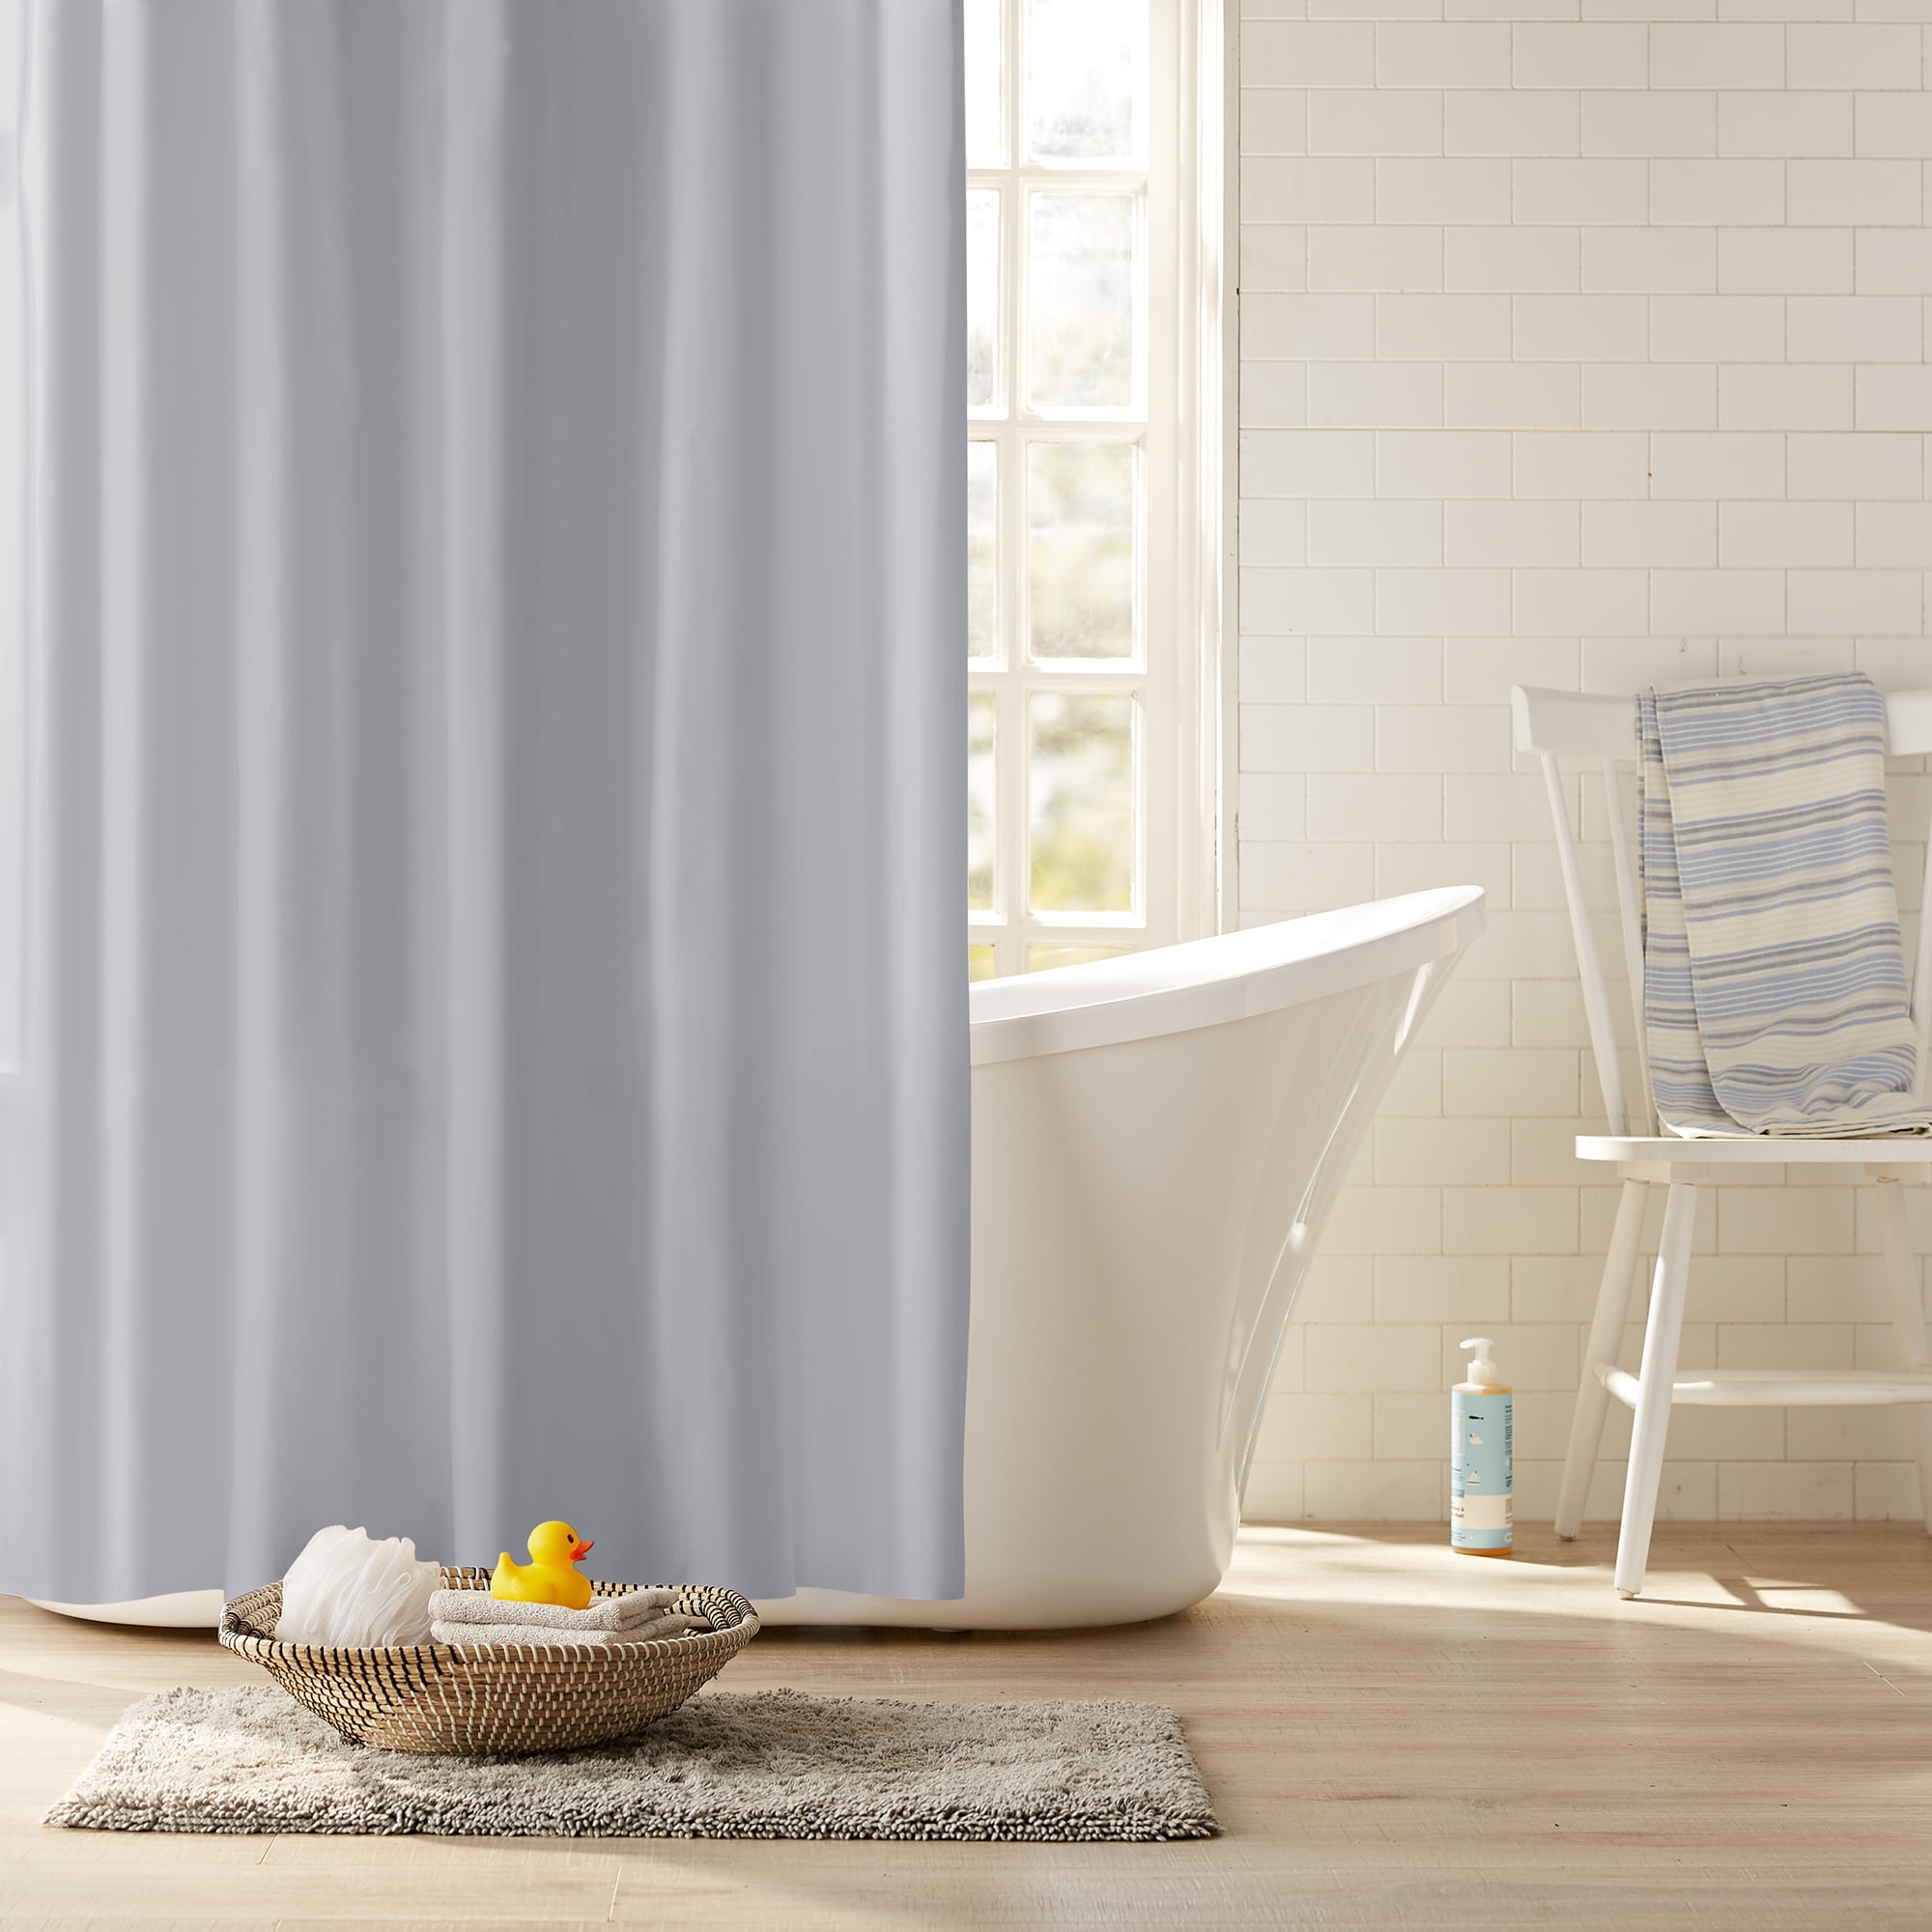 Made of Mould-Free PEVA X Curtain for Shower iDesign 3.0 Liner Shower Curtain 